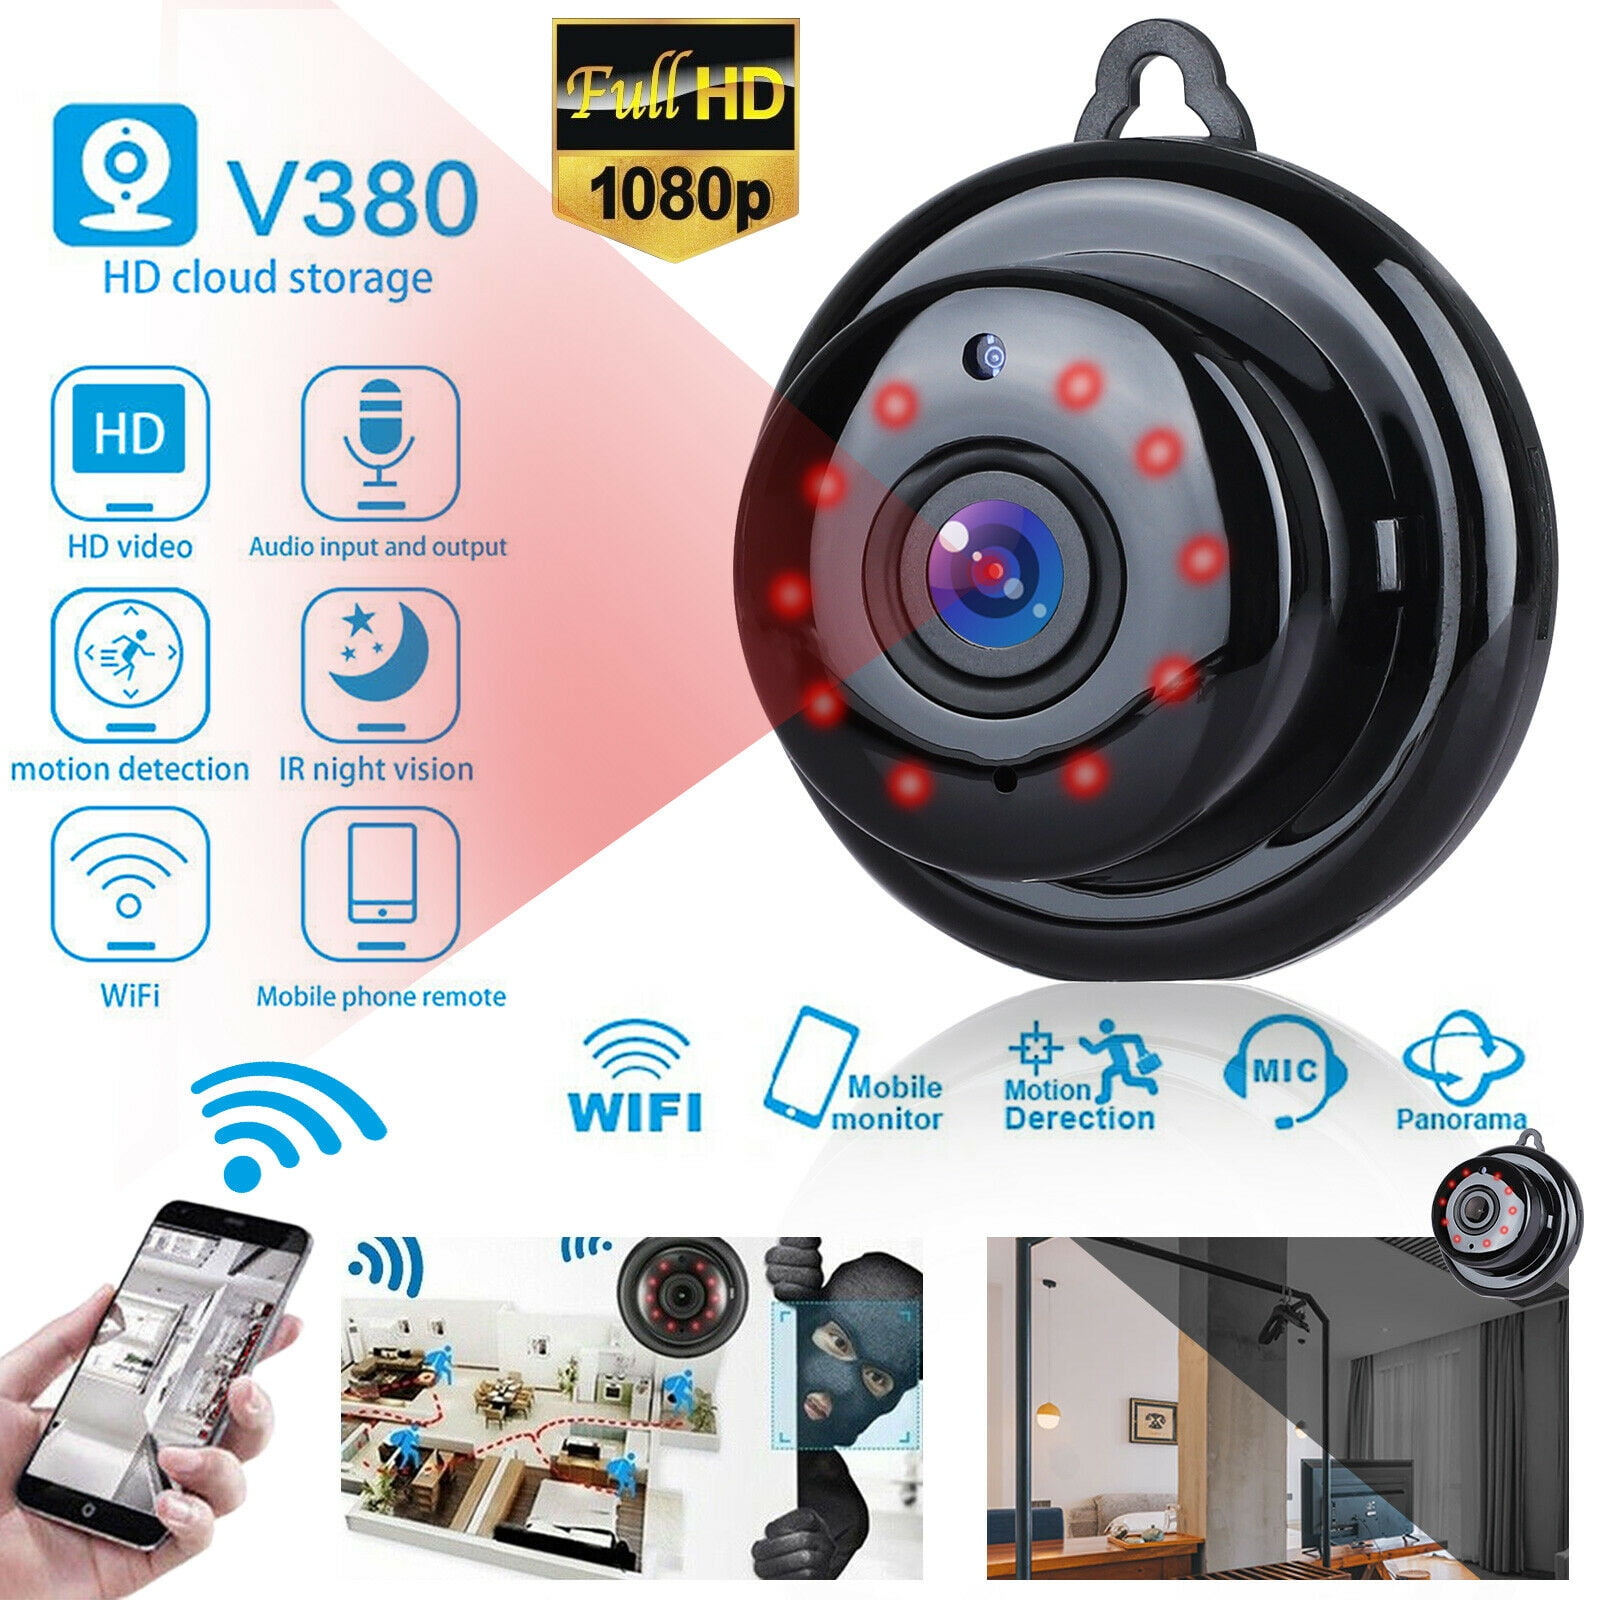 1080P HD Hot Link Remote Surveillance Camera Recorder Support PC/iOS/Android Black with Night Vision and Motion Activated Indoor Use Security Cameras Surveillance Cam for Home Security